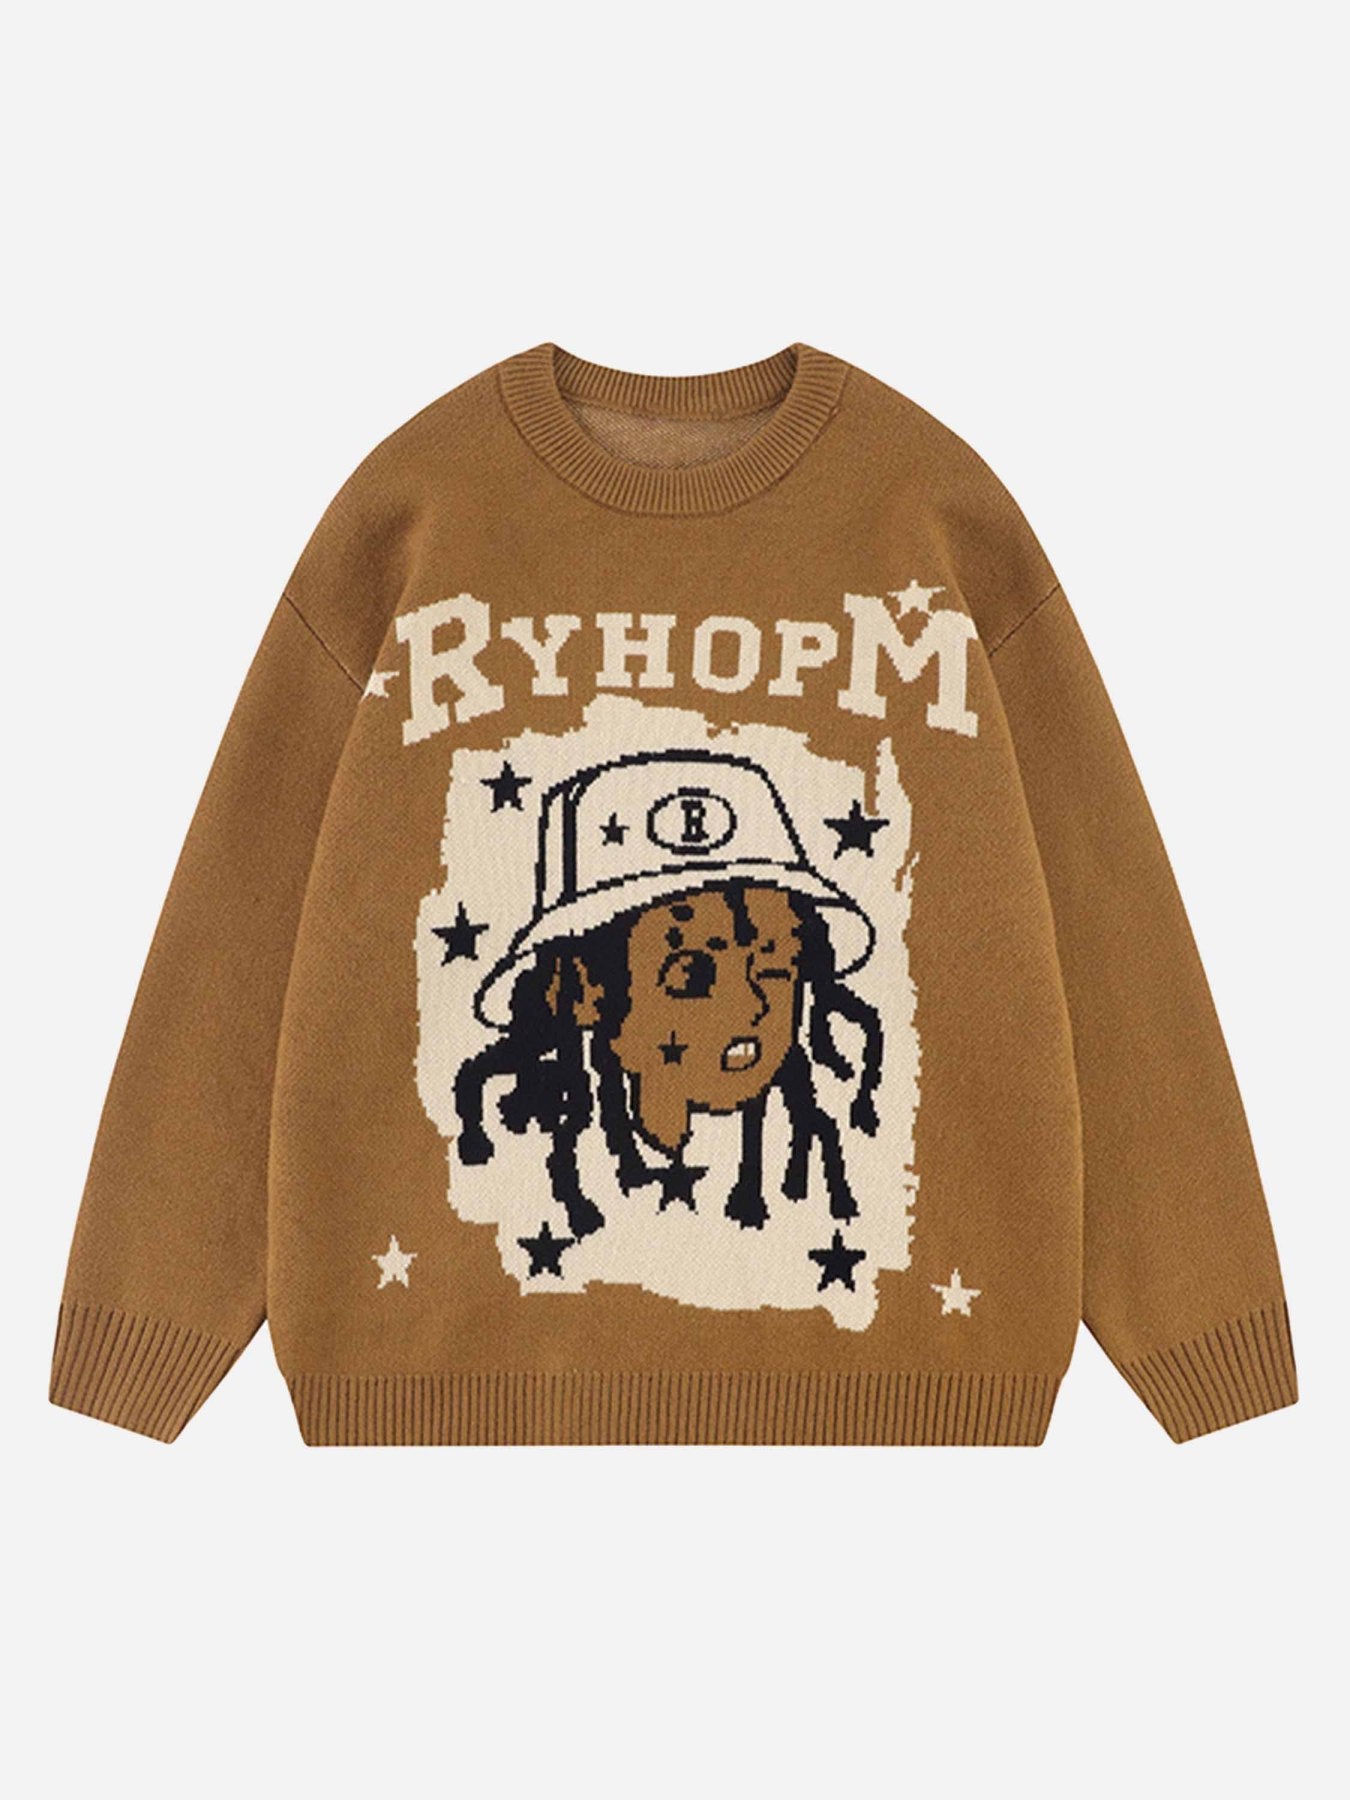 The Supermade Hip-hop Creative Embroidered Knitwear